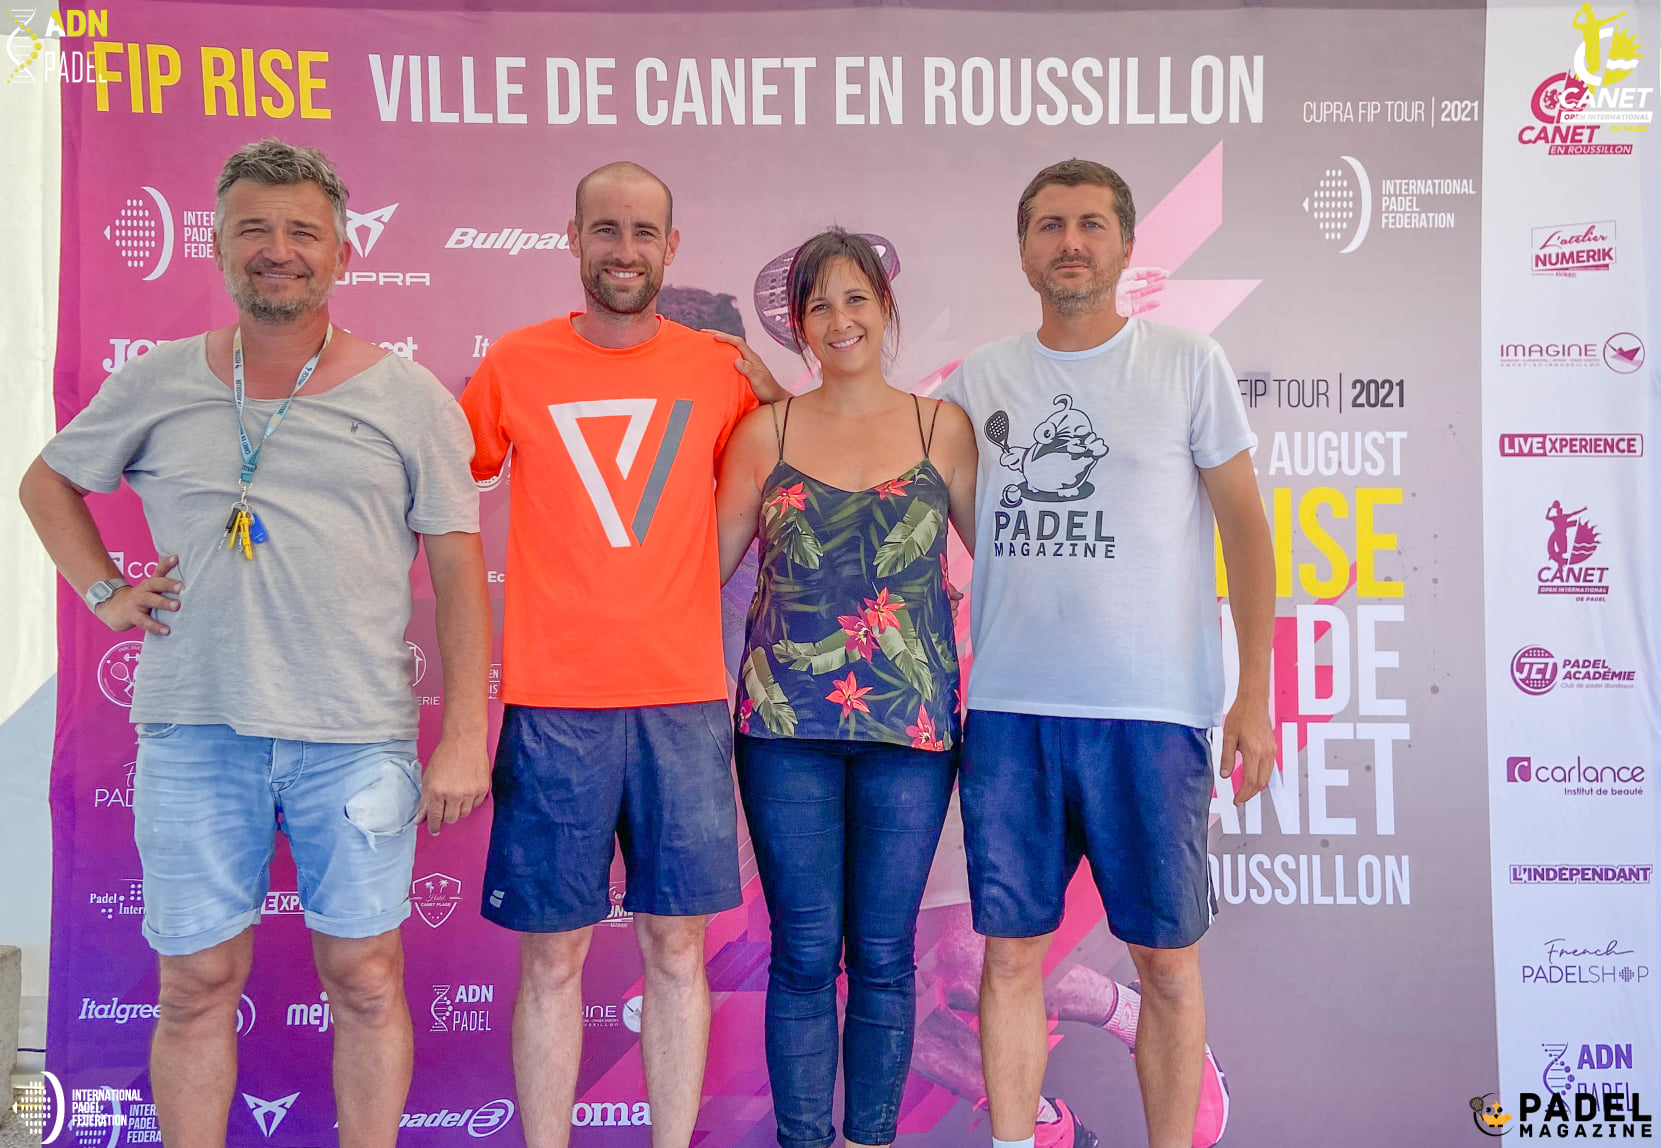 ADN Padel Event - FIP Rise Canet: “We will be there next year”